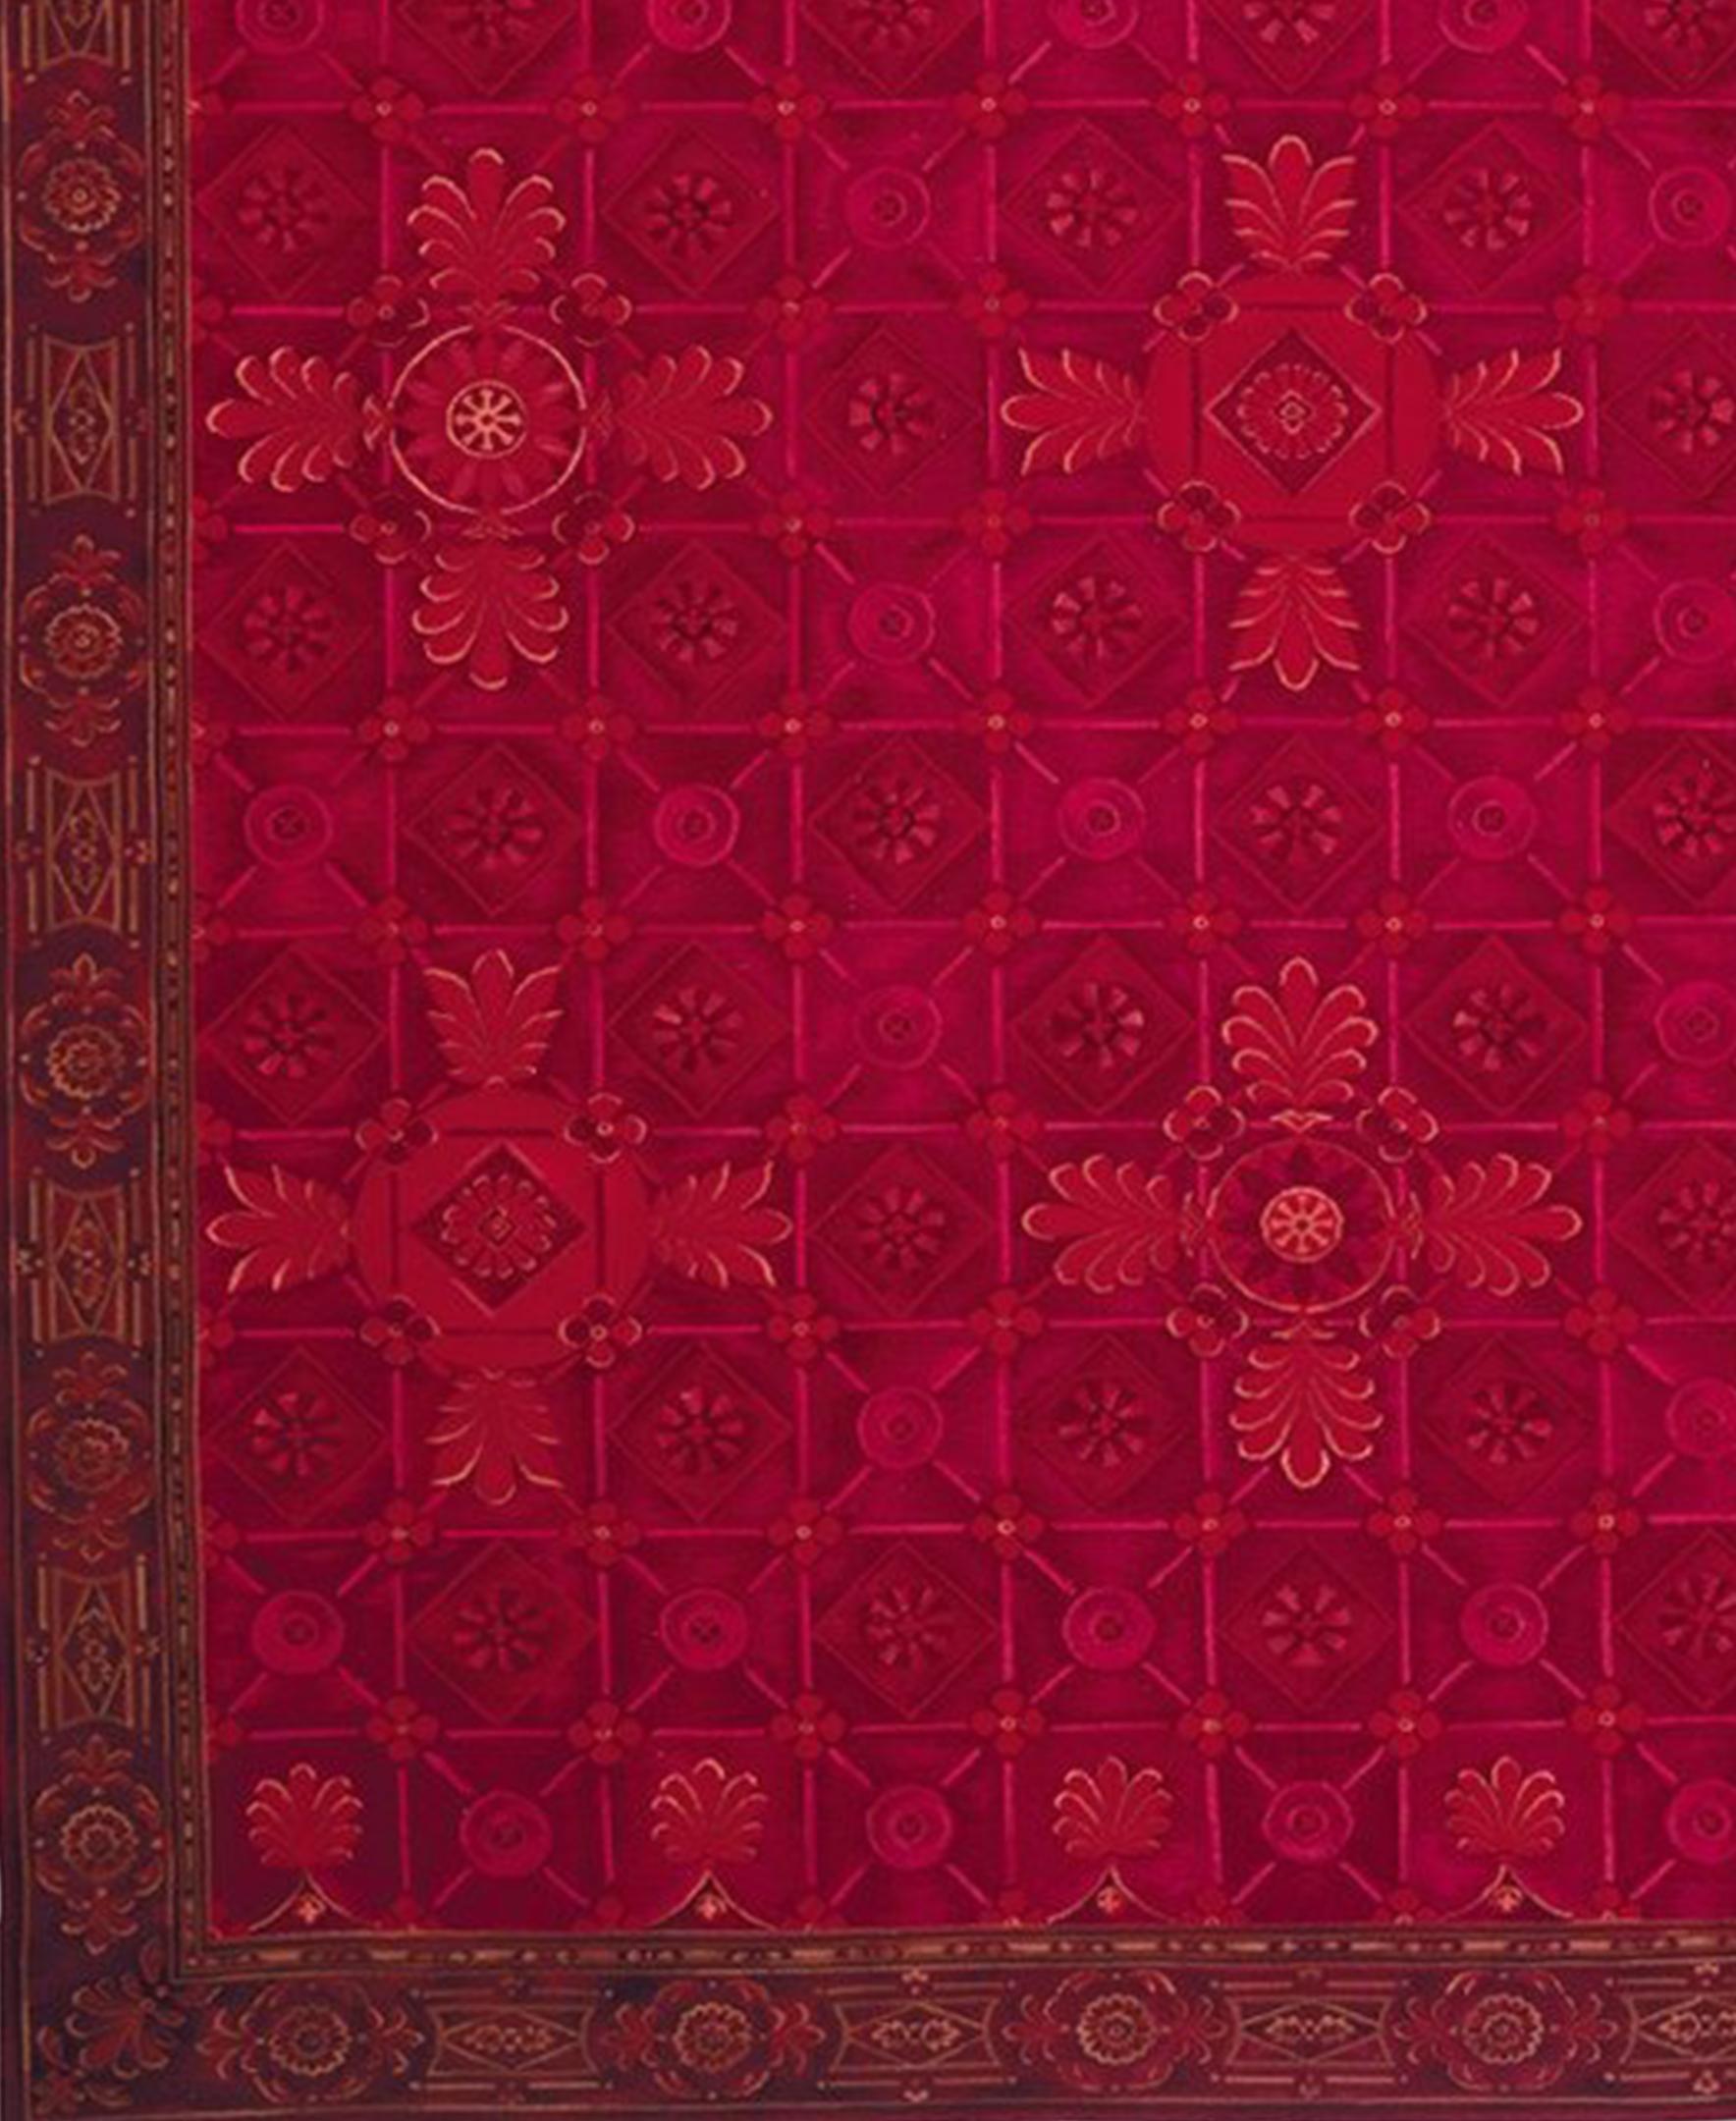 The Pamplona rug is based on an original Asmara painting by Russian artist Ludmila Slavinsky who imbued the rug with the drama of the Spanish city. A thousand tonal shades of reds from ruby to Cabernet are complimented by gold and beige in a design